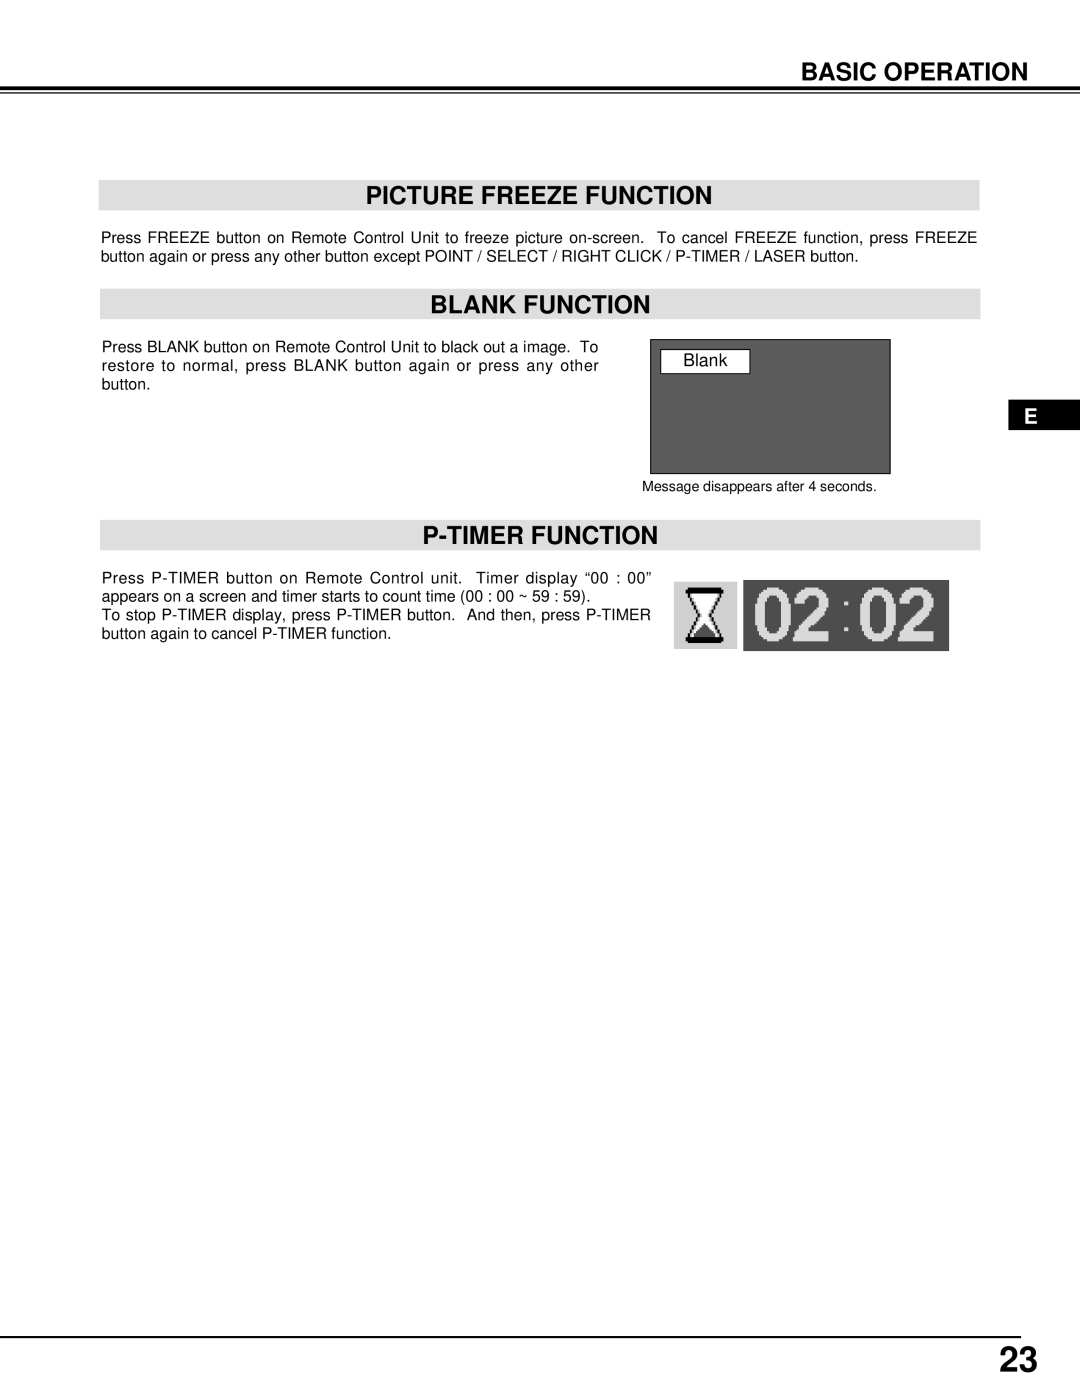 Dukane 28A8945, 28A9058 manual Basic Operation Picture Freeze Function, Blank Function, P-Timer Function 